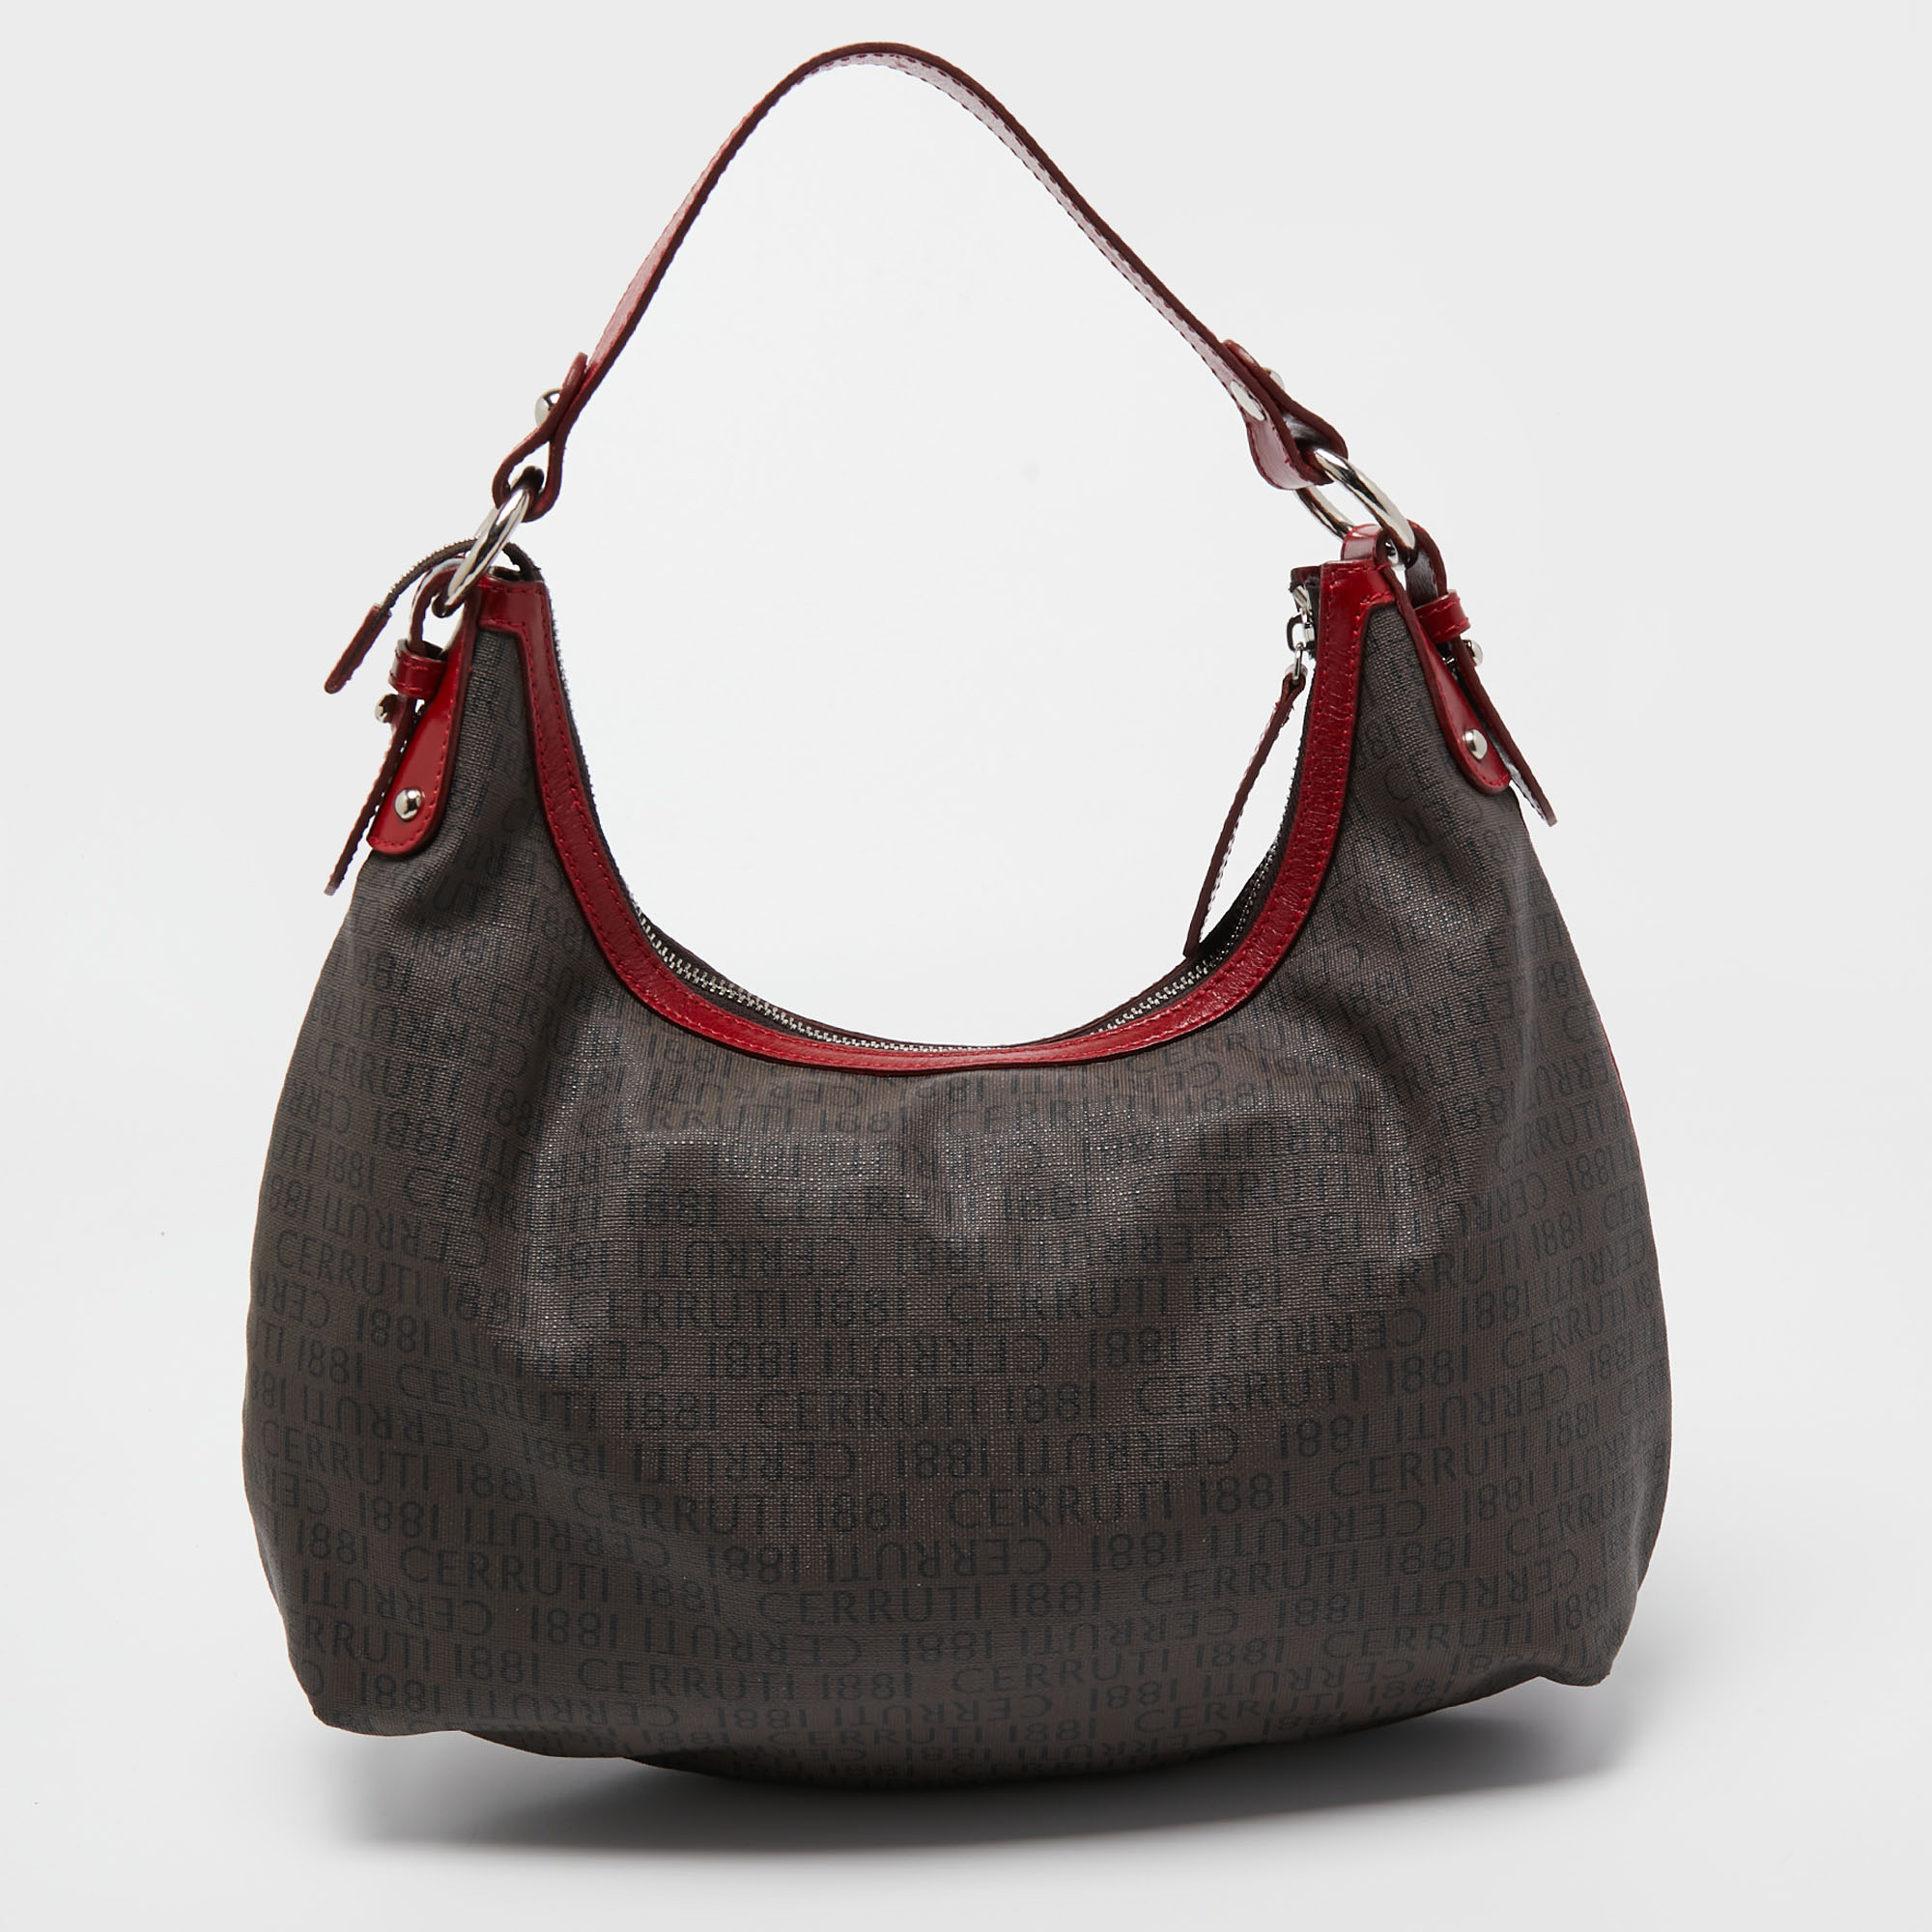 Cerruti Dark Brown/Red Monogram Coated Canvas And Leather Hobo